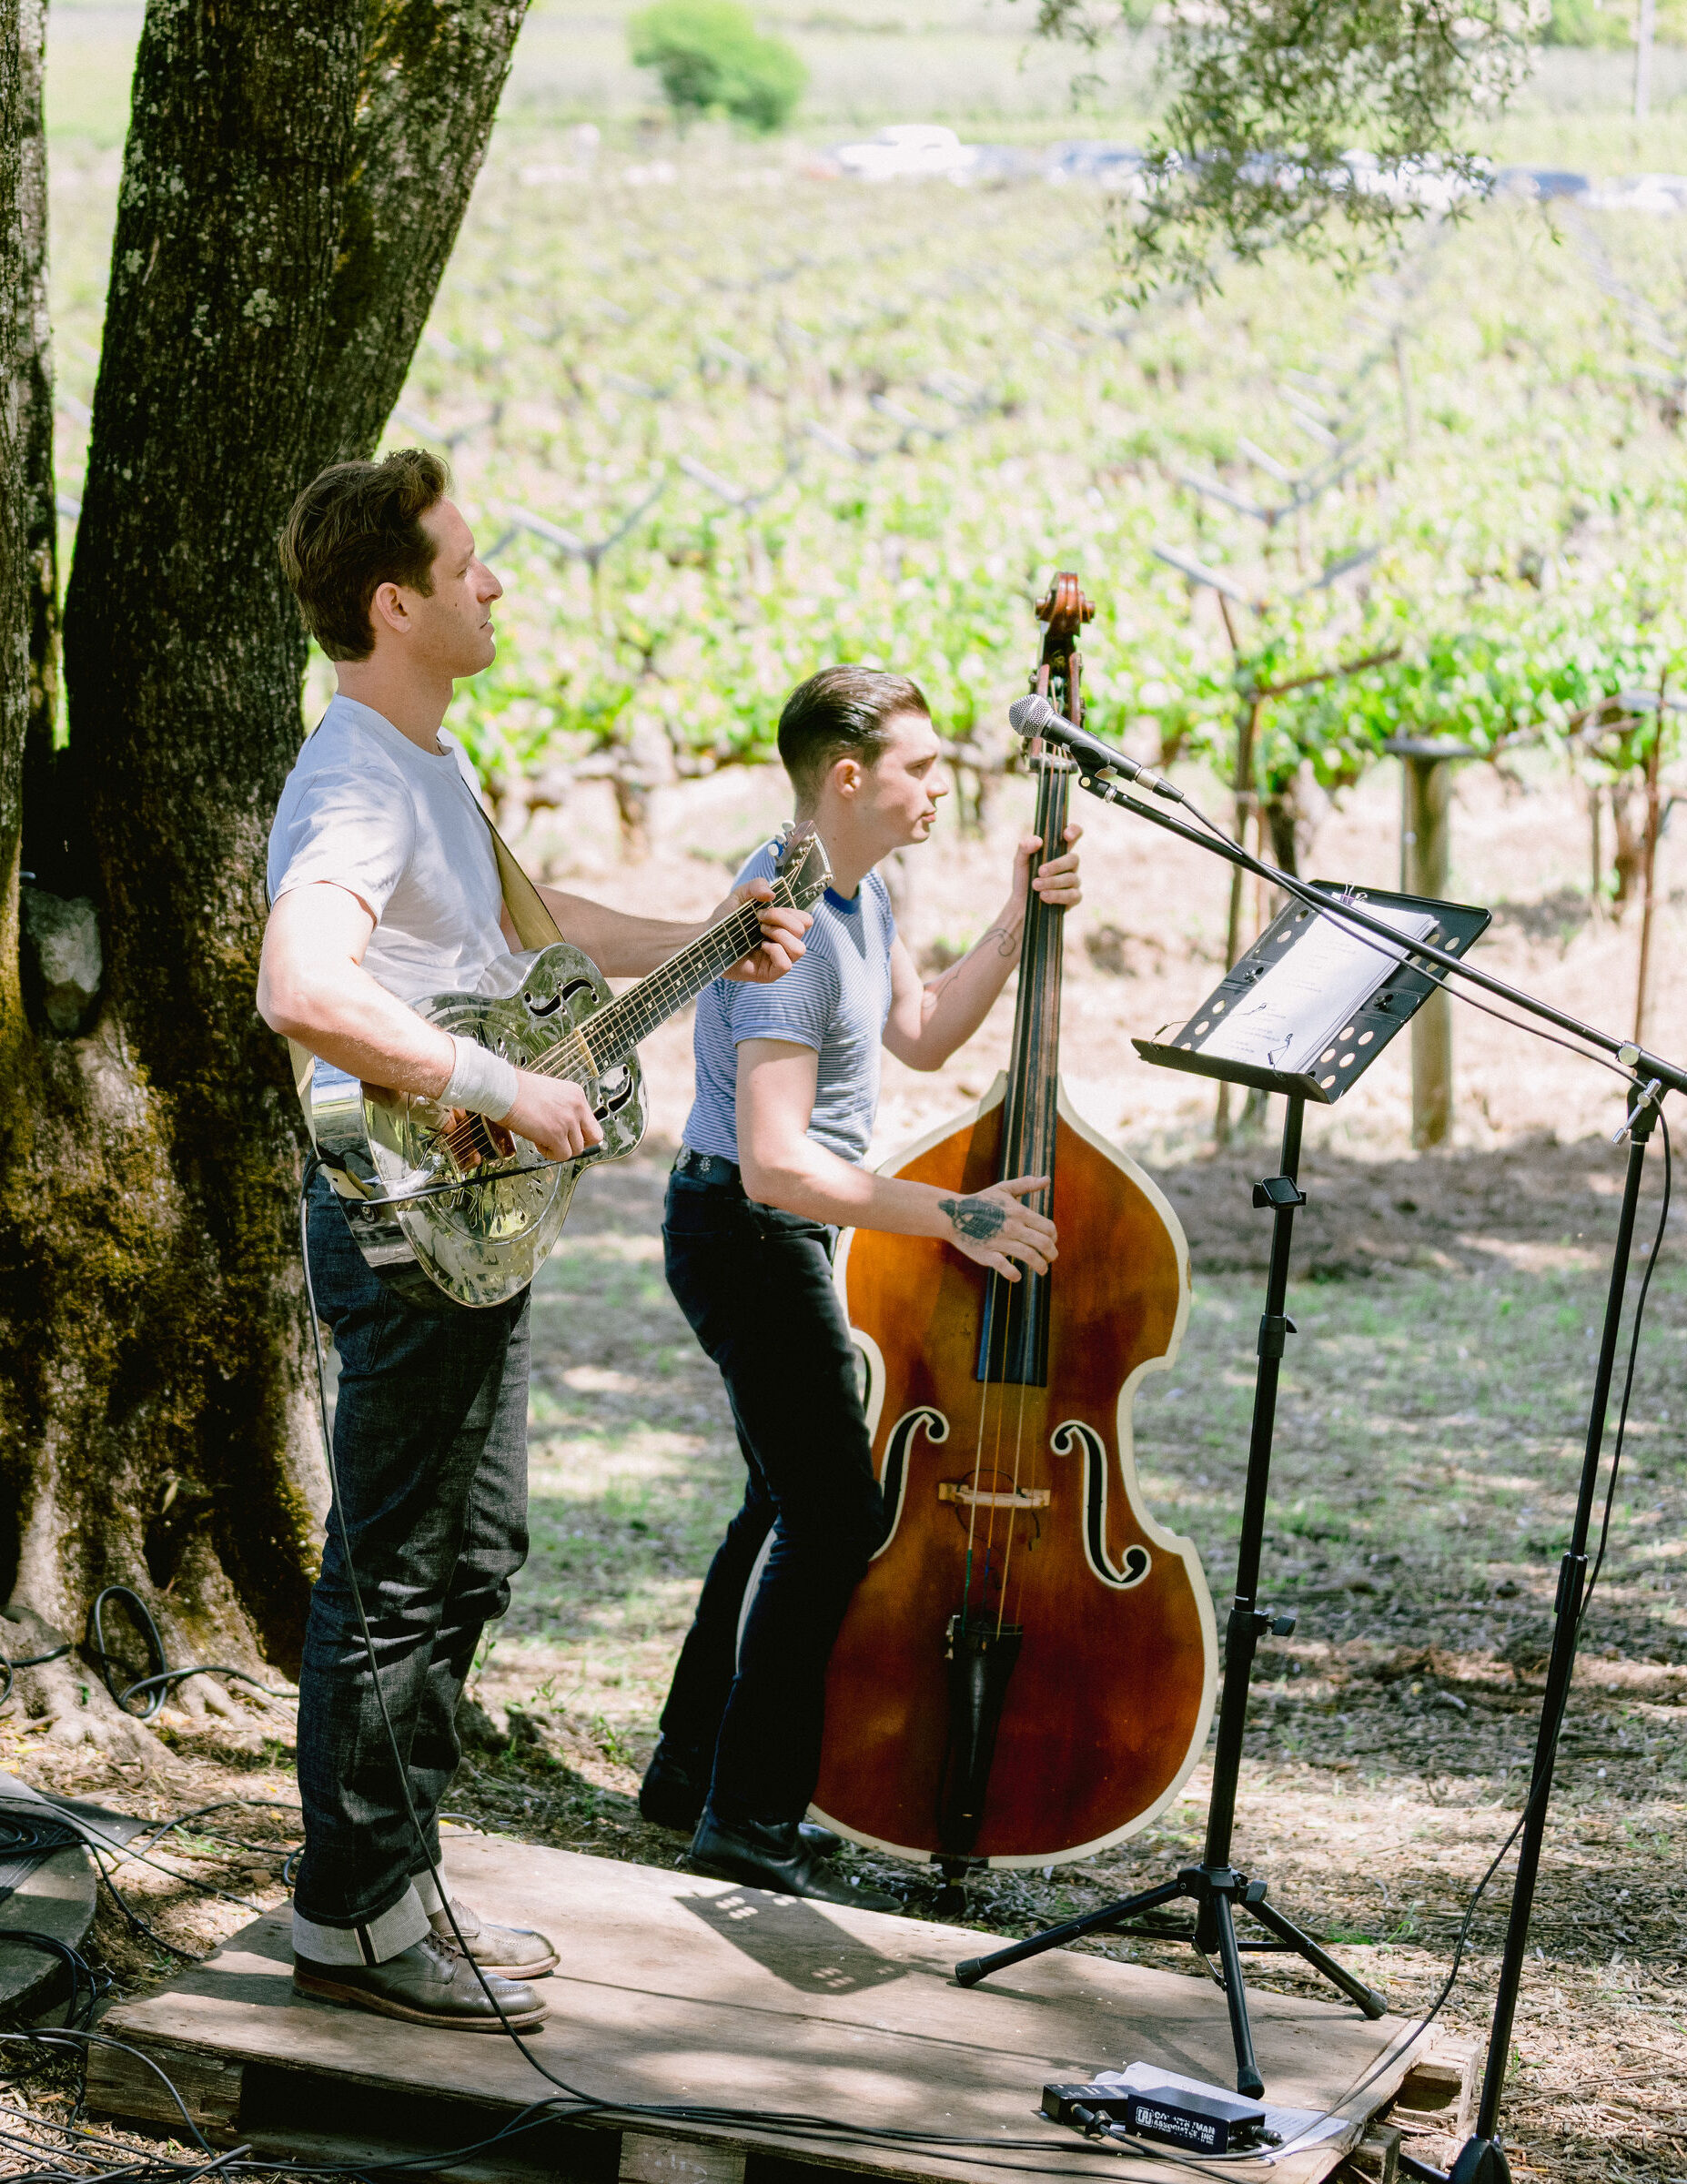 Guitarist and bass player playing in vineyard